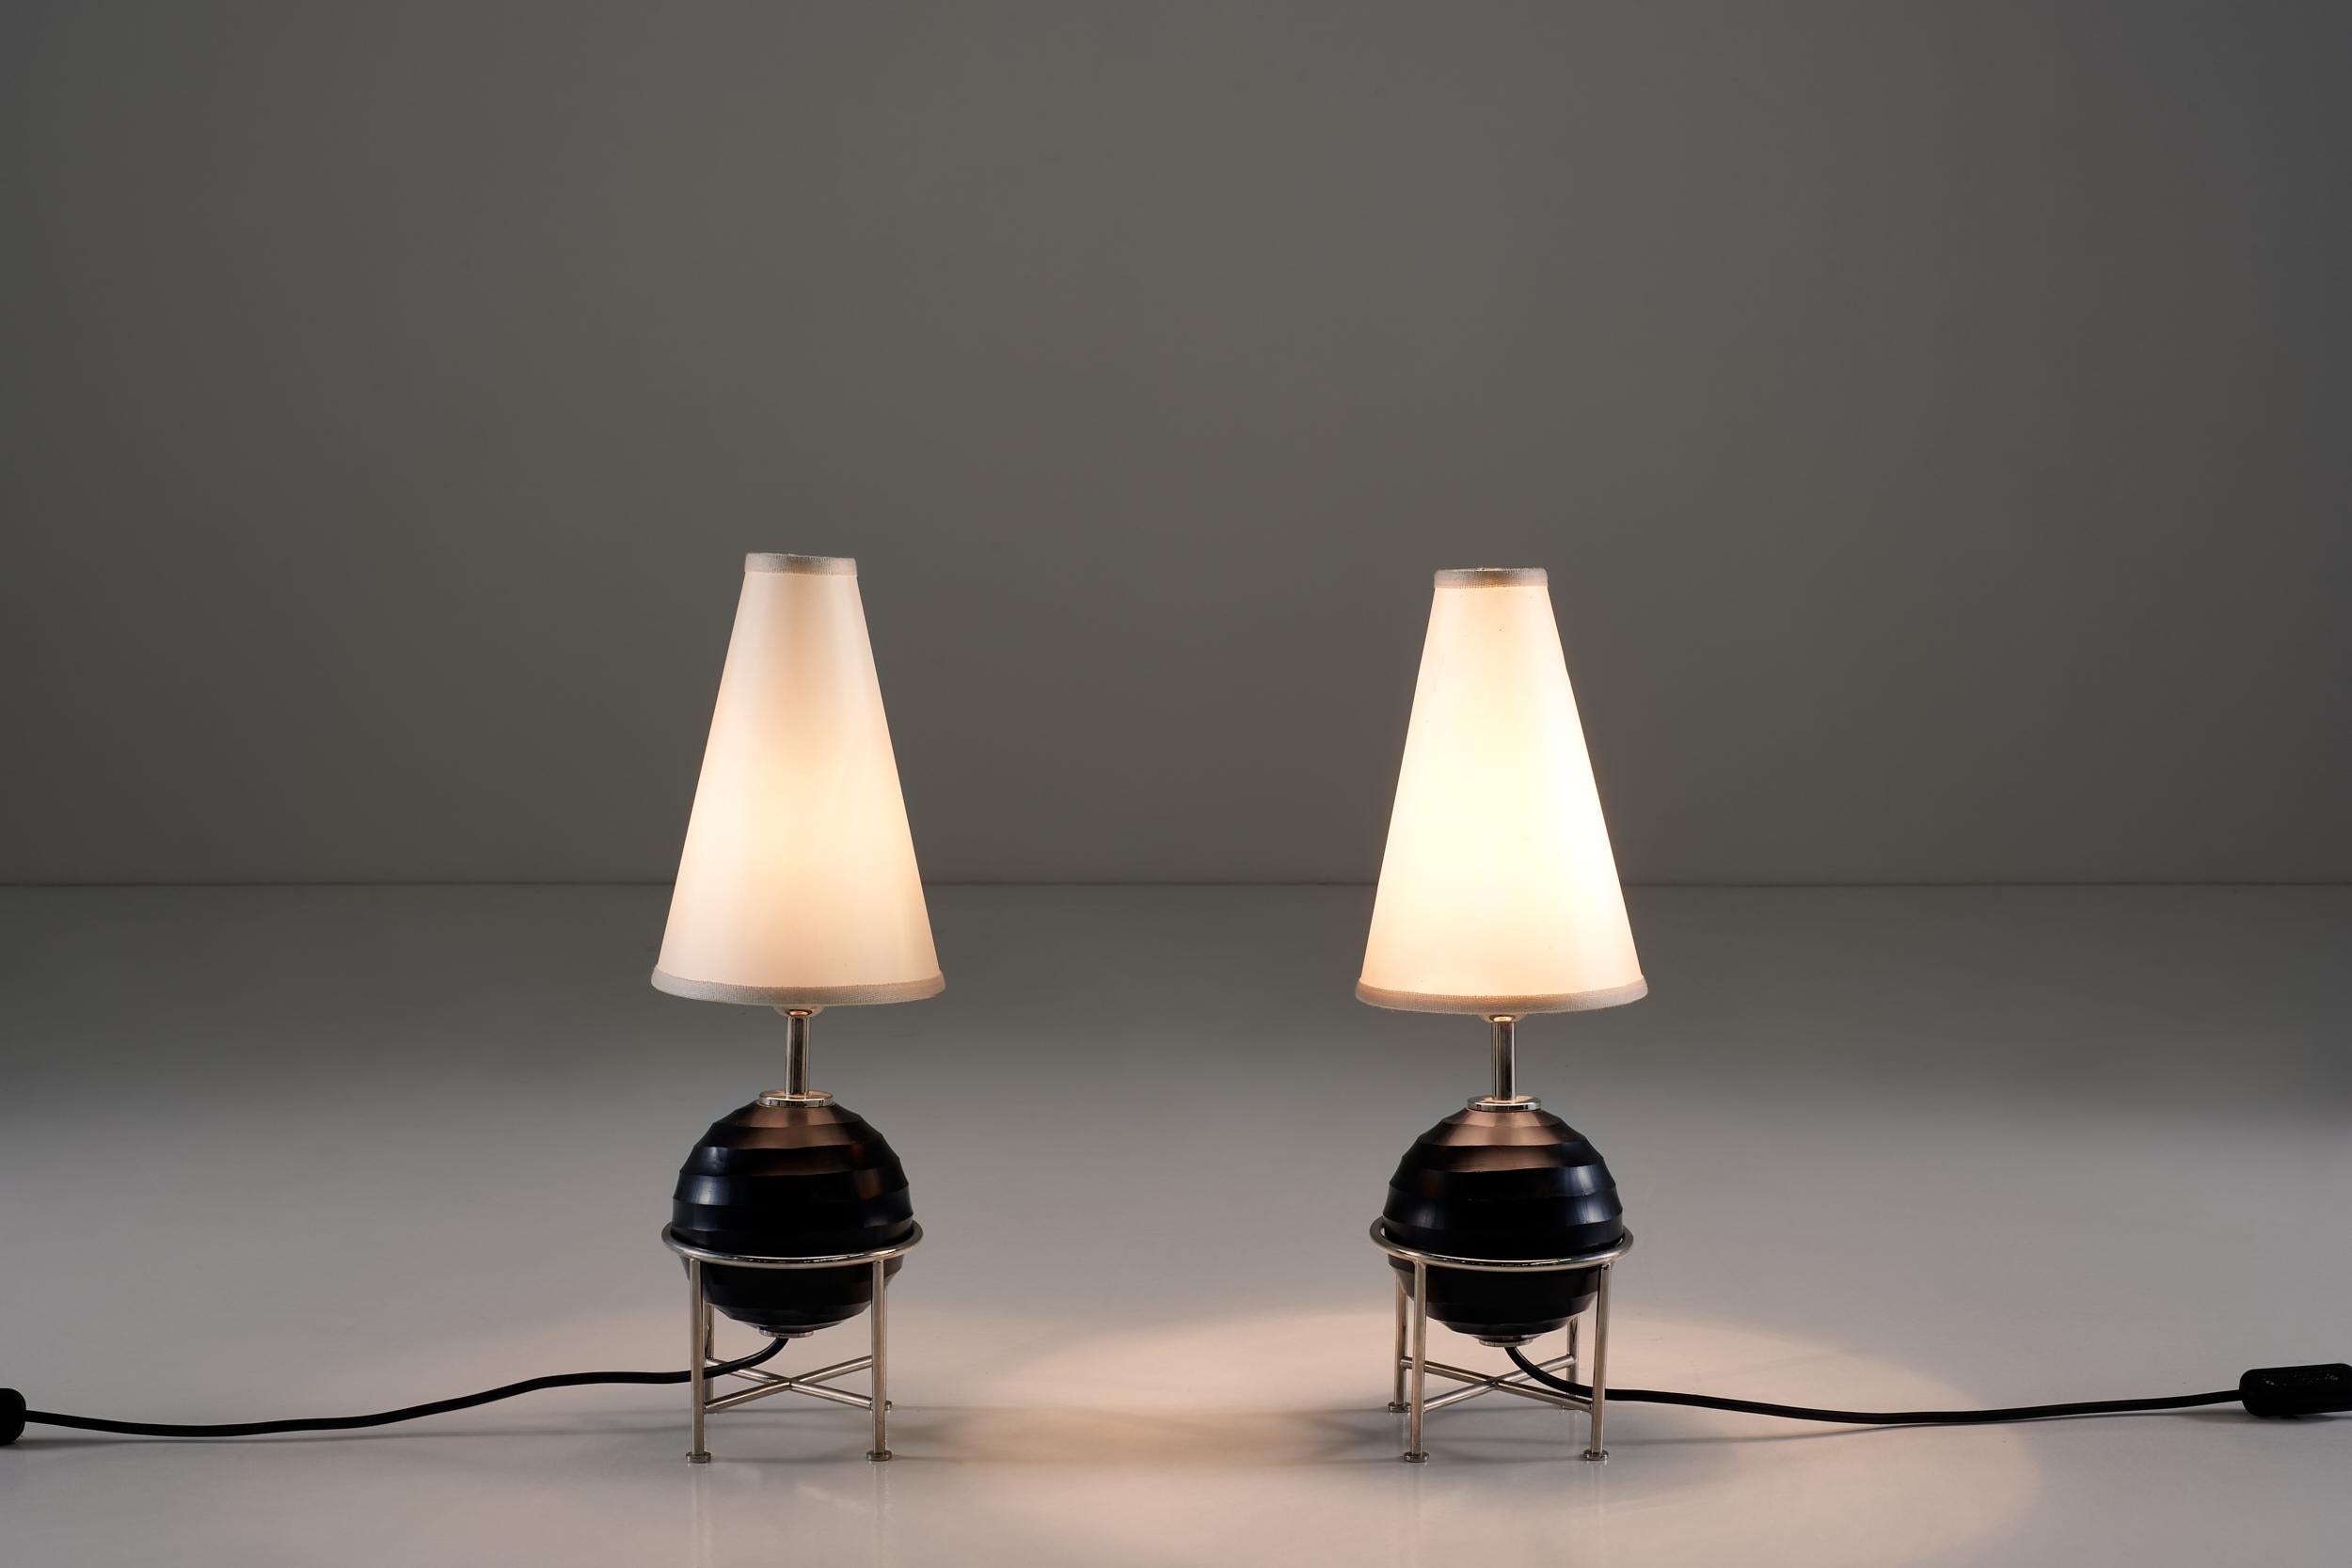 These lamps merge functionality and harmonious lines in a new, elegant way thanks to their black glass body, steel supports and fabric lampshades.